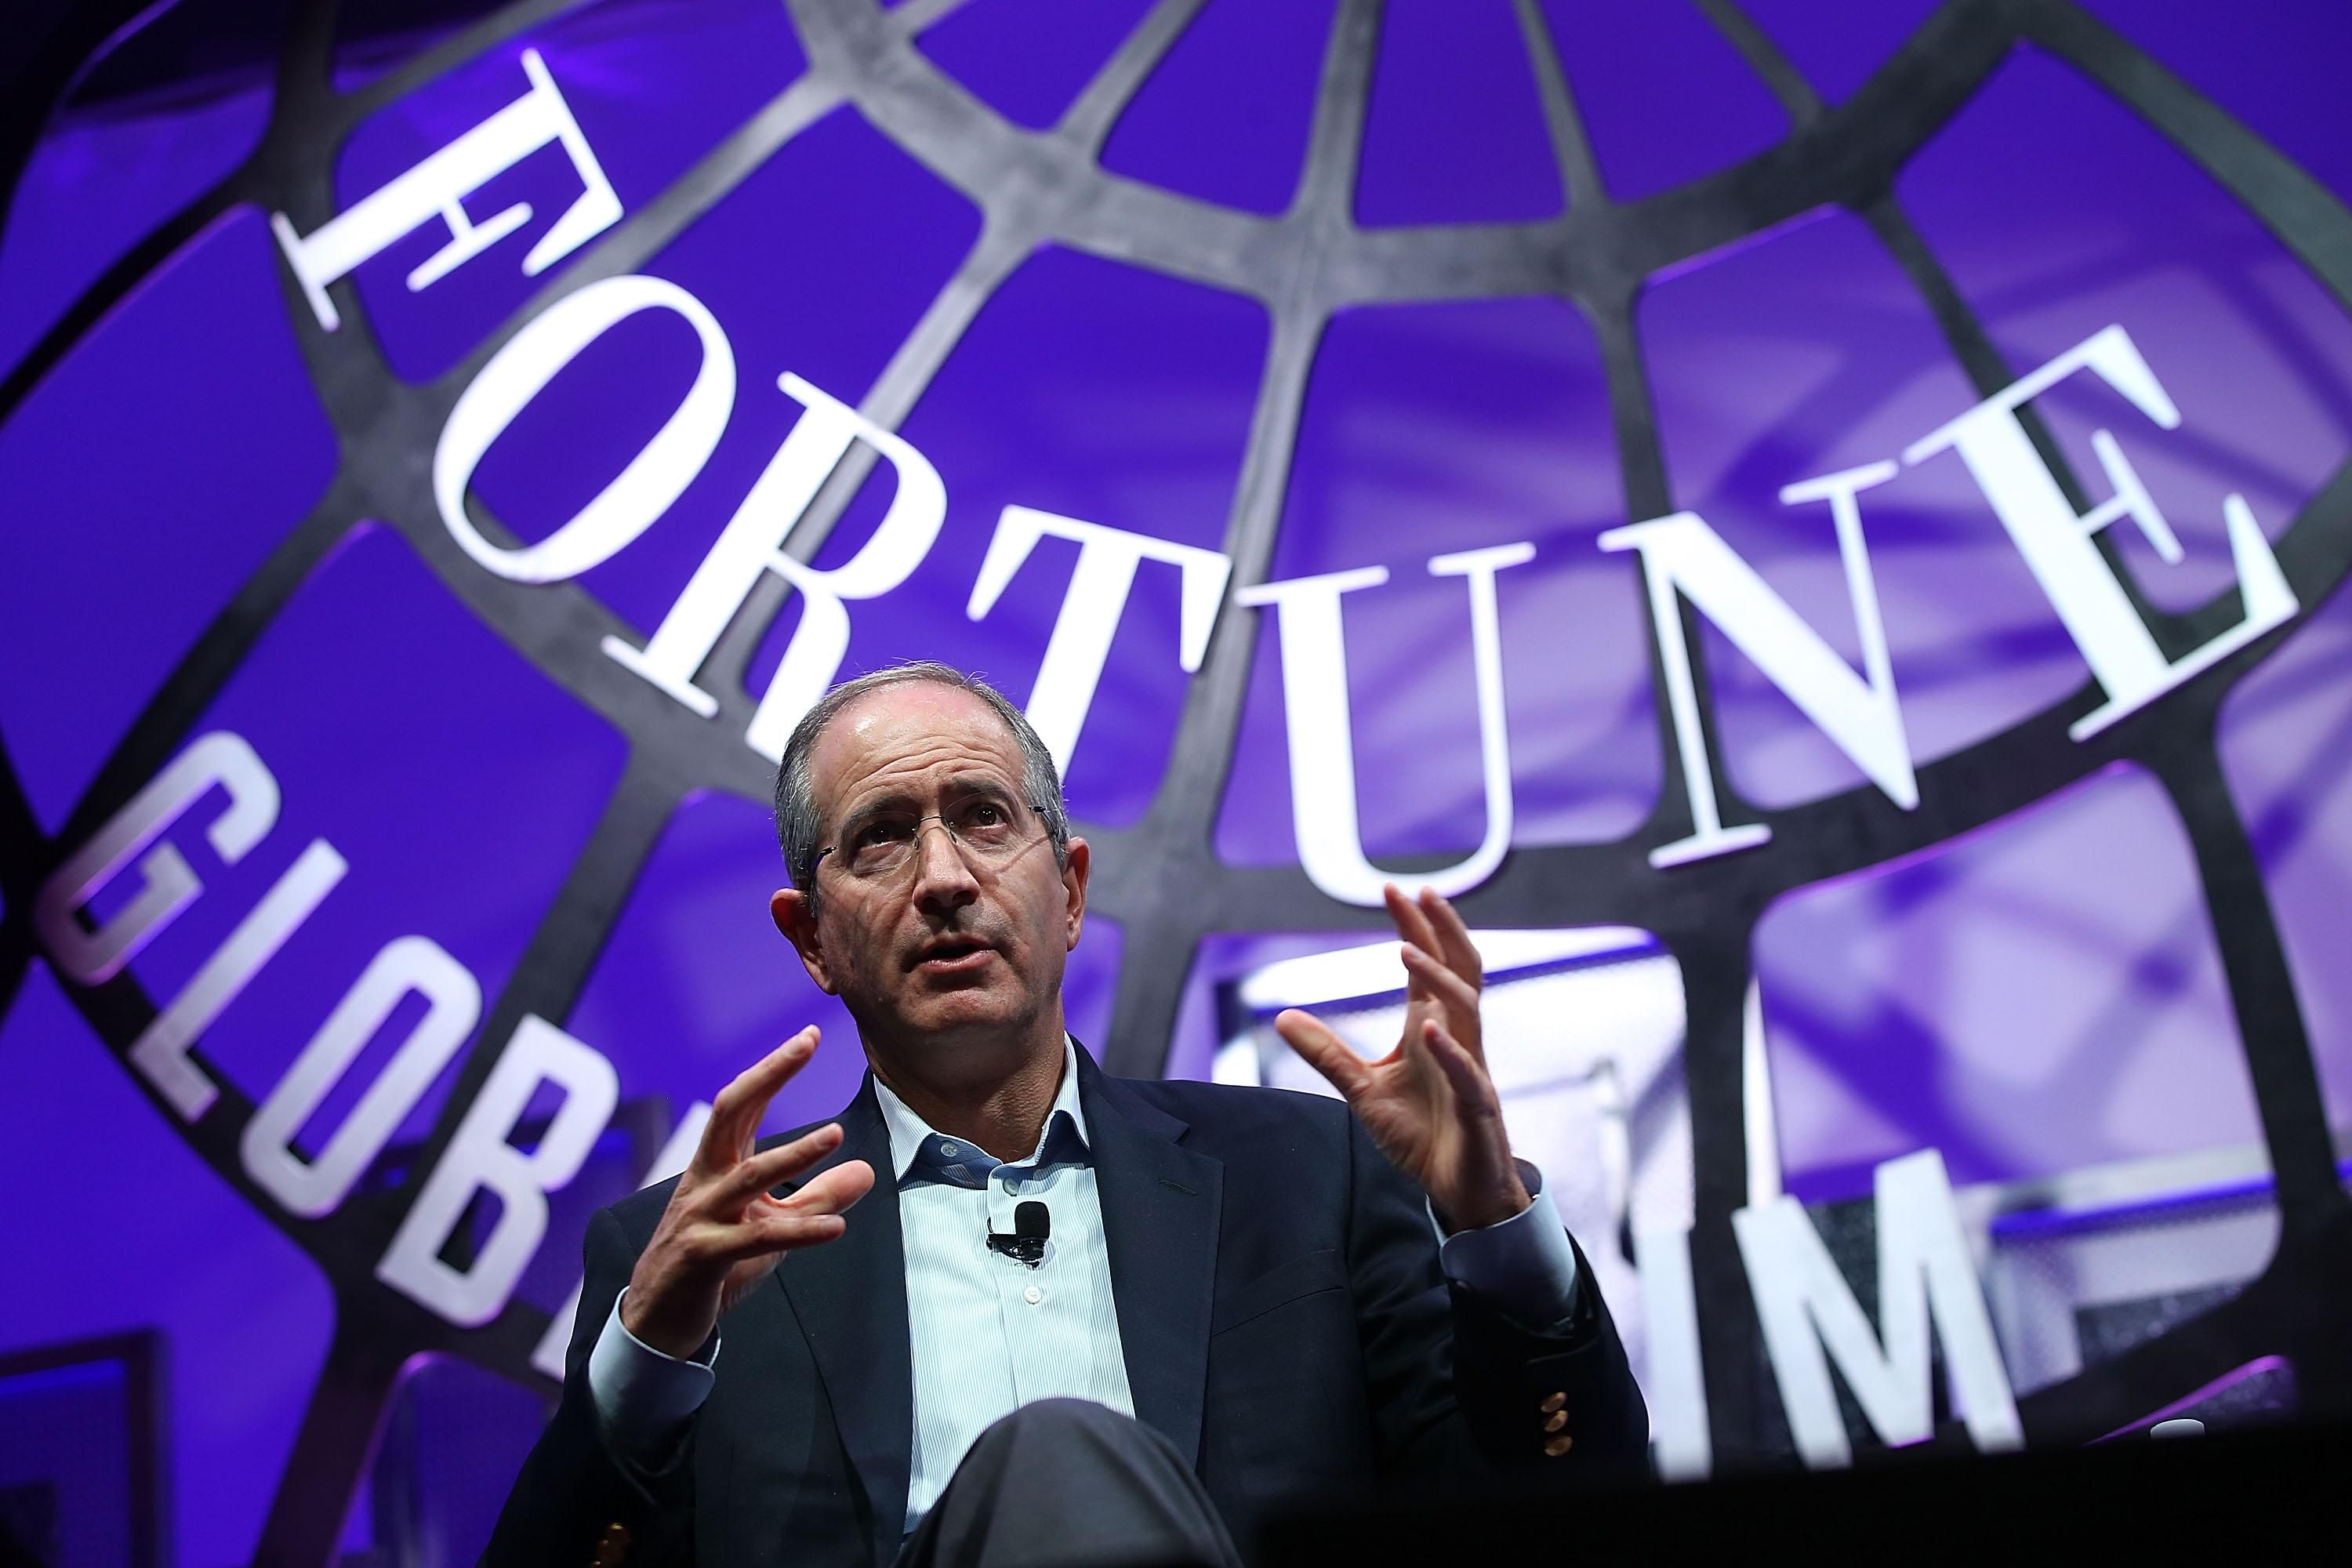 Comcast chairman and CEO Brian L. Roberts speaks during the Fortune Global Forum on November 3, 2015 in San Francisco, California.